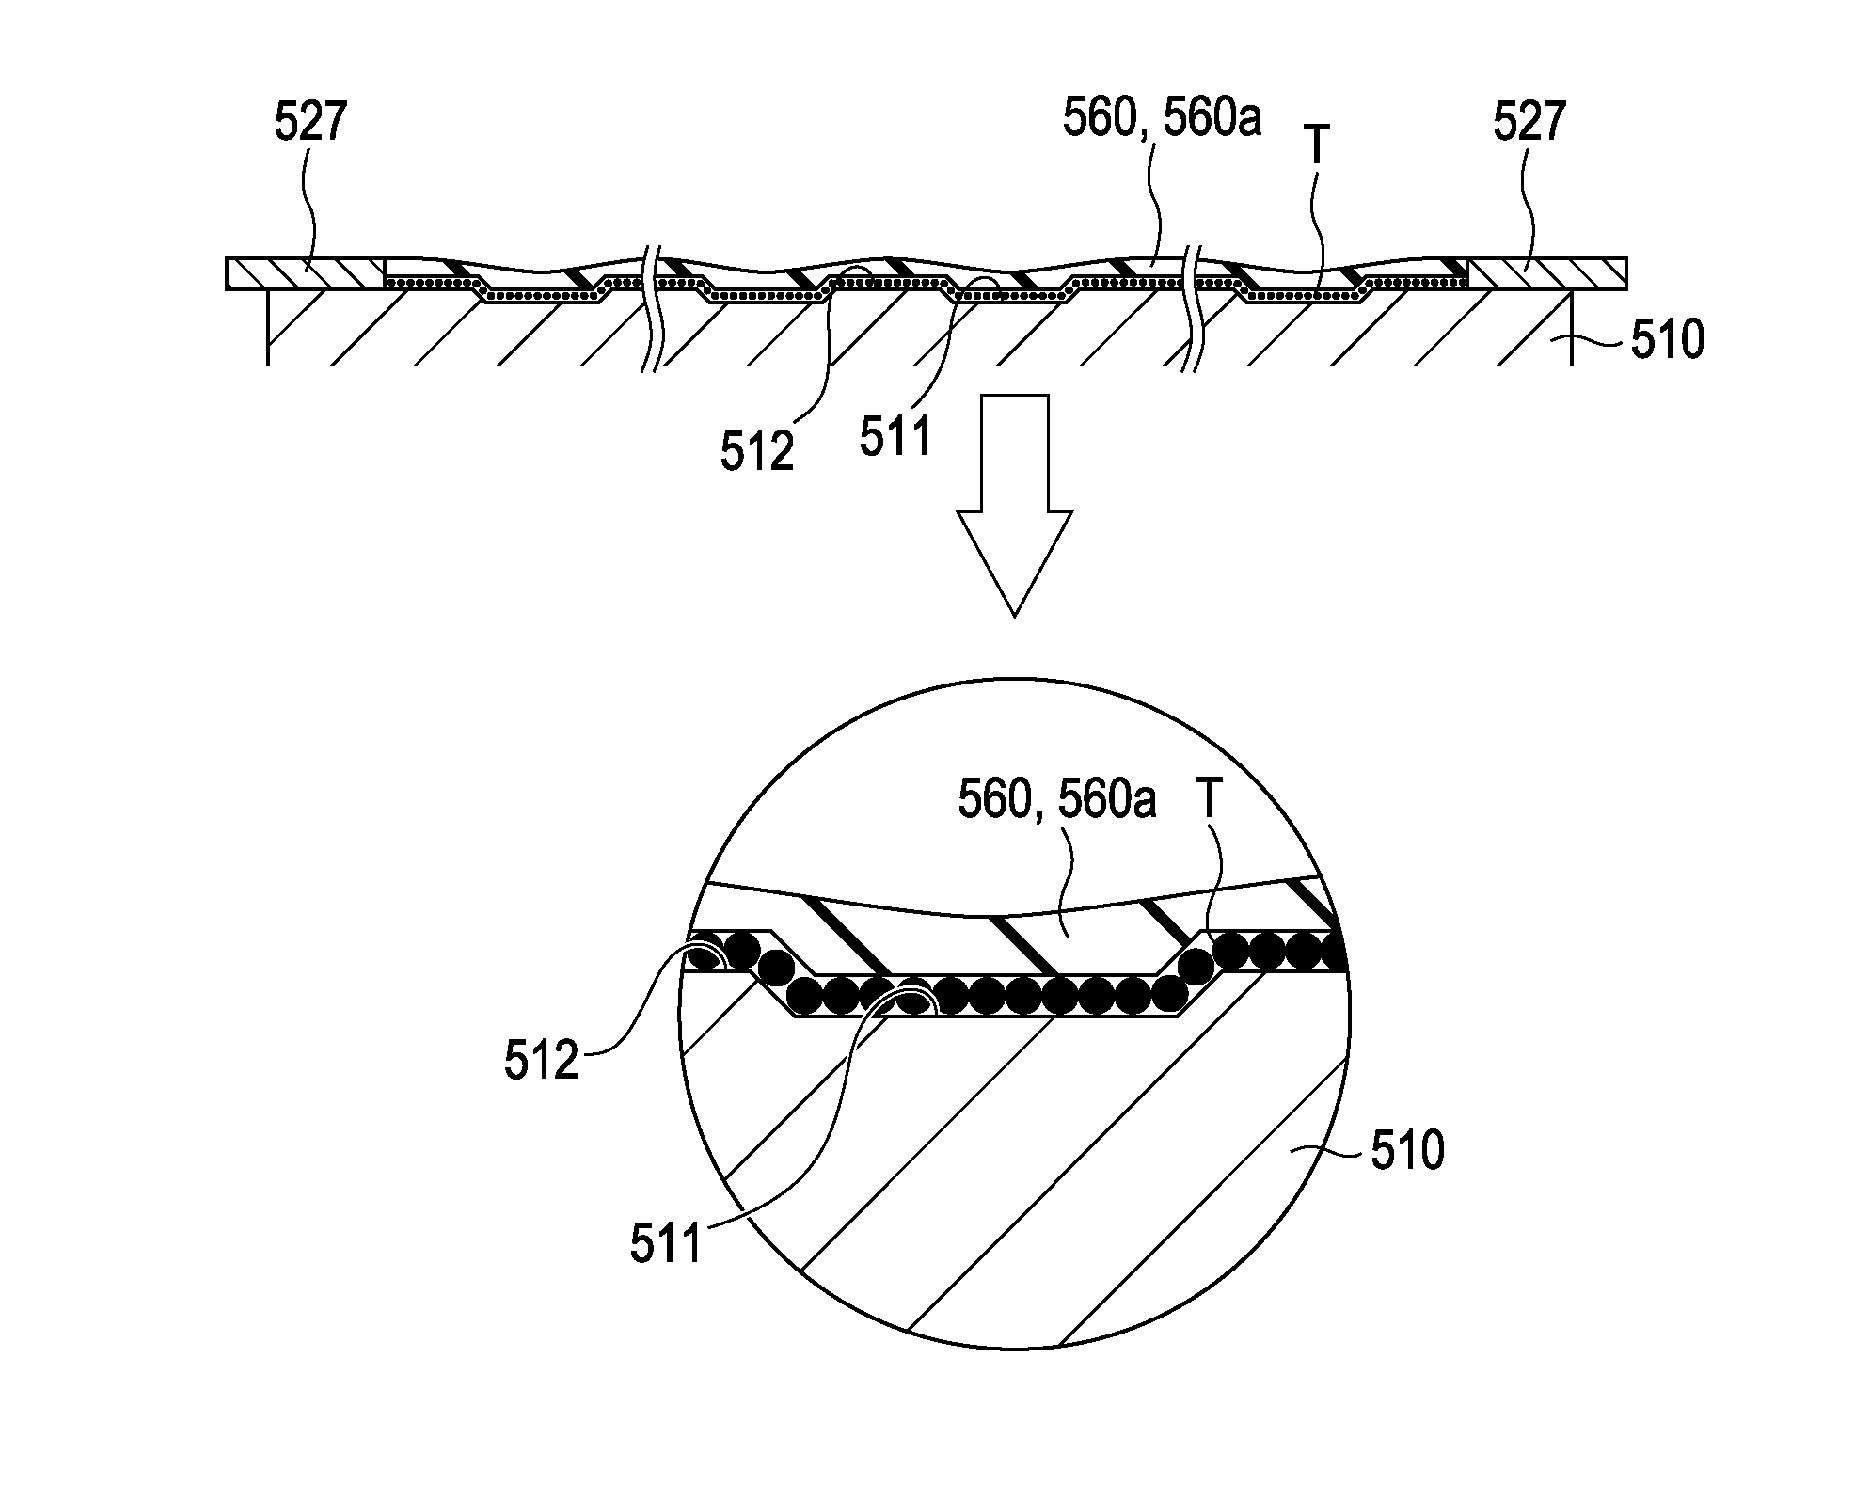 Toner, method for forming image, and image forming apparatus